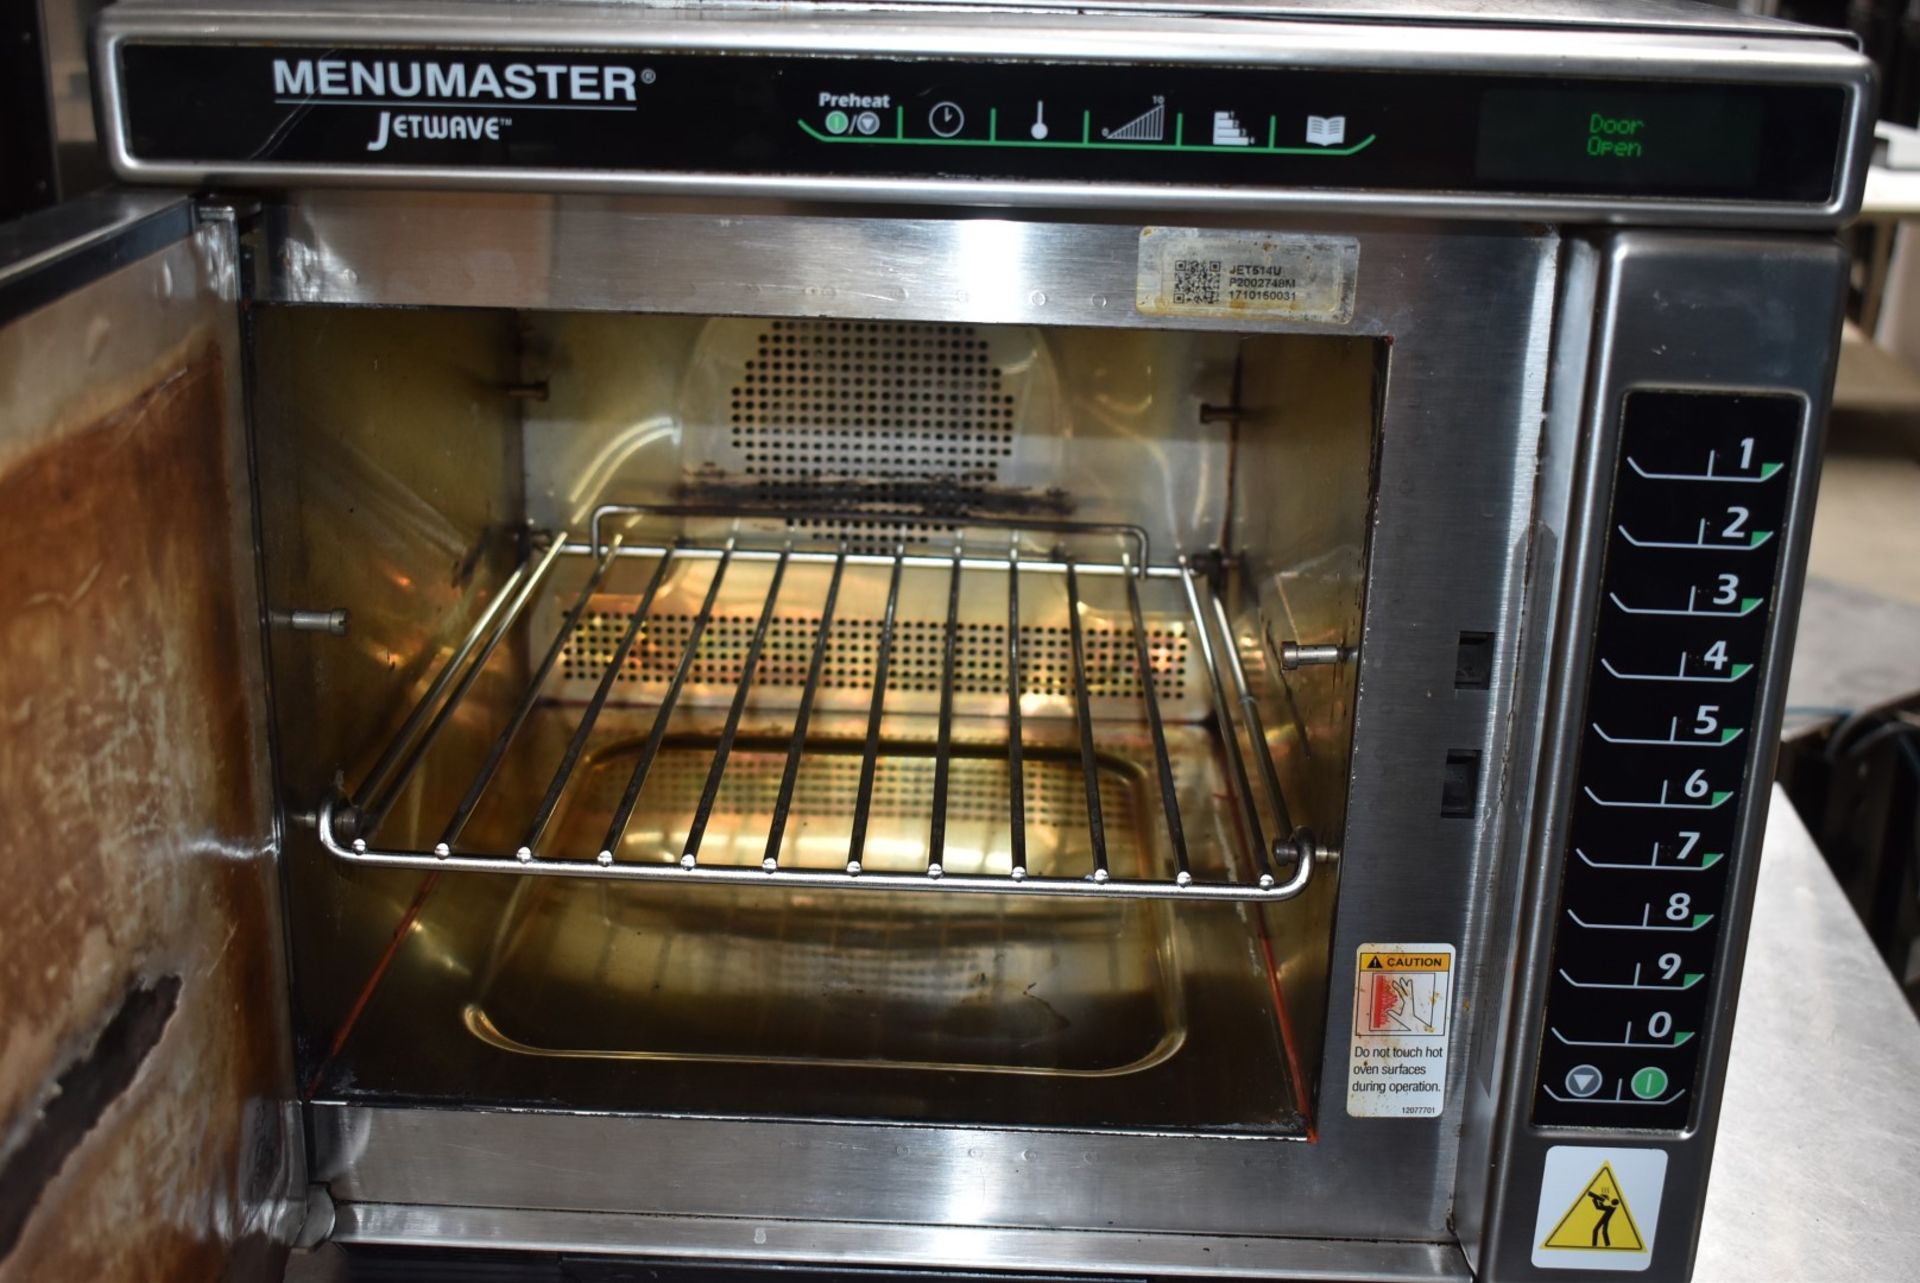 1 x Menumaster Jetwave JET514U High Speed Combination Microwave Oven - RRP £2,400 - Manufacture - Image 6 of 11